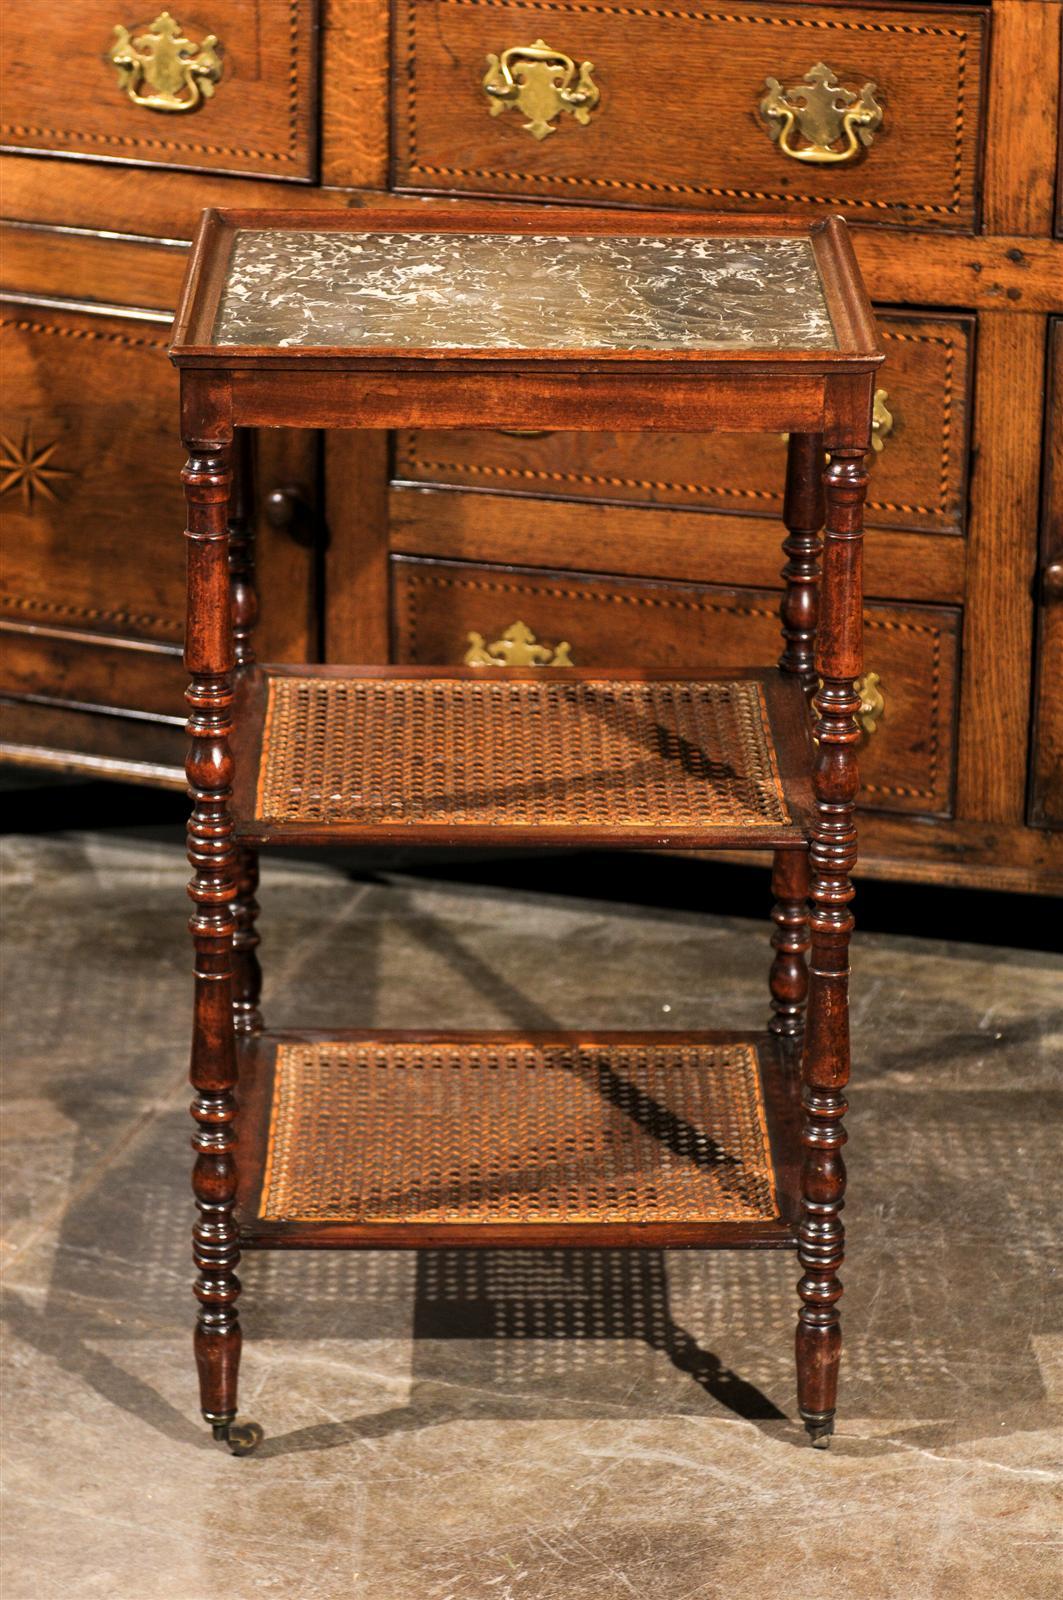 French Mid-19th Century Etagere or Trolley with Cane Shelves and Marble-Top 7